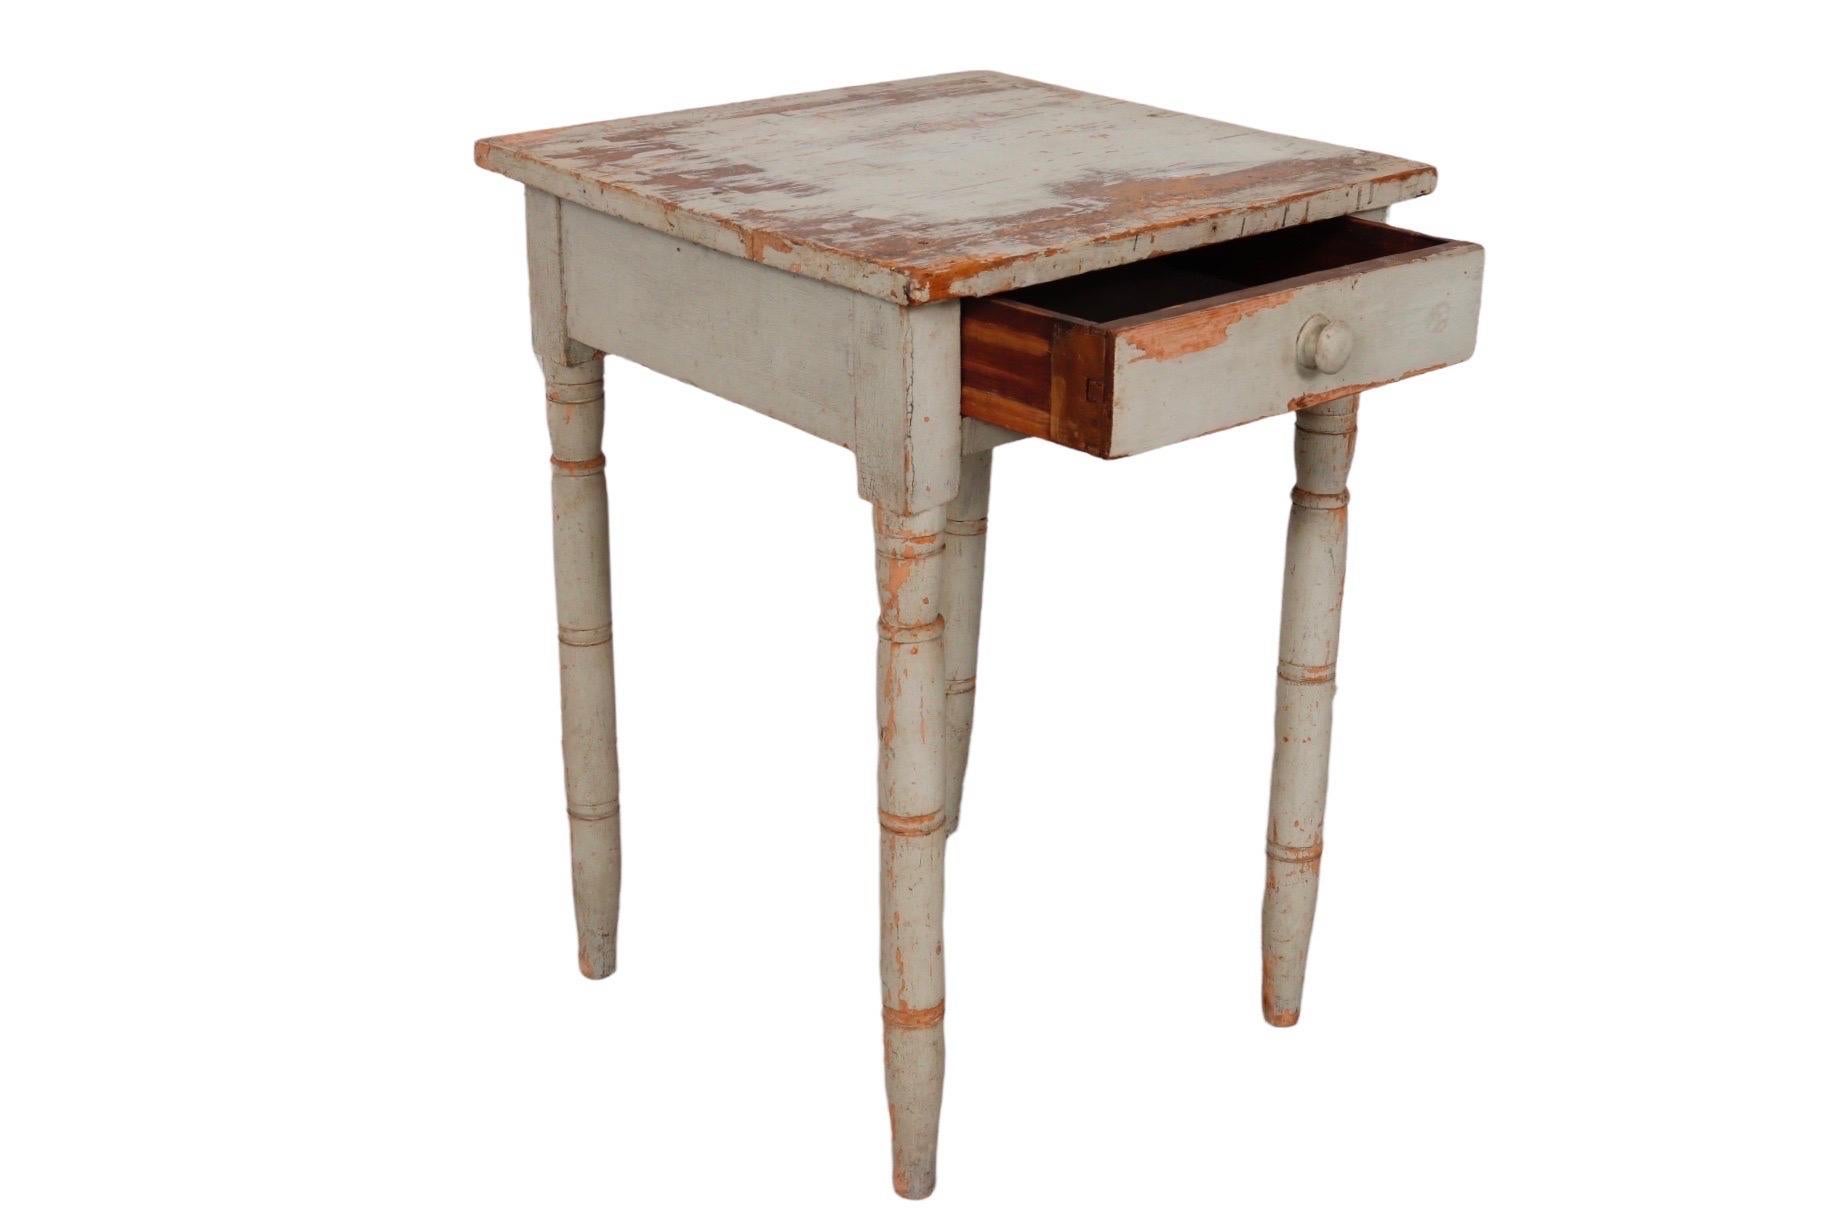 A primitive painted side table. A plank wood top and lightly turned legs house a single hand dovetailed drawer that opens with a knob handle. The light sage colored paint finish is highly distressed with craquelure throughout and some loss of paint.